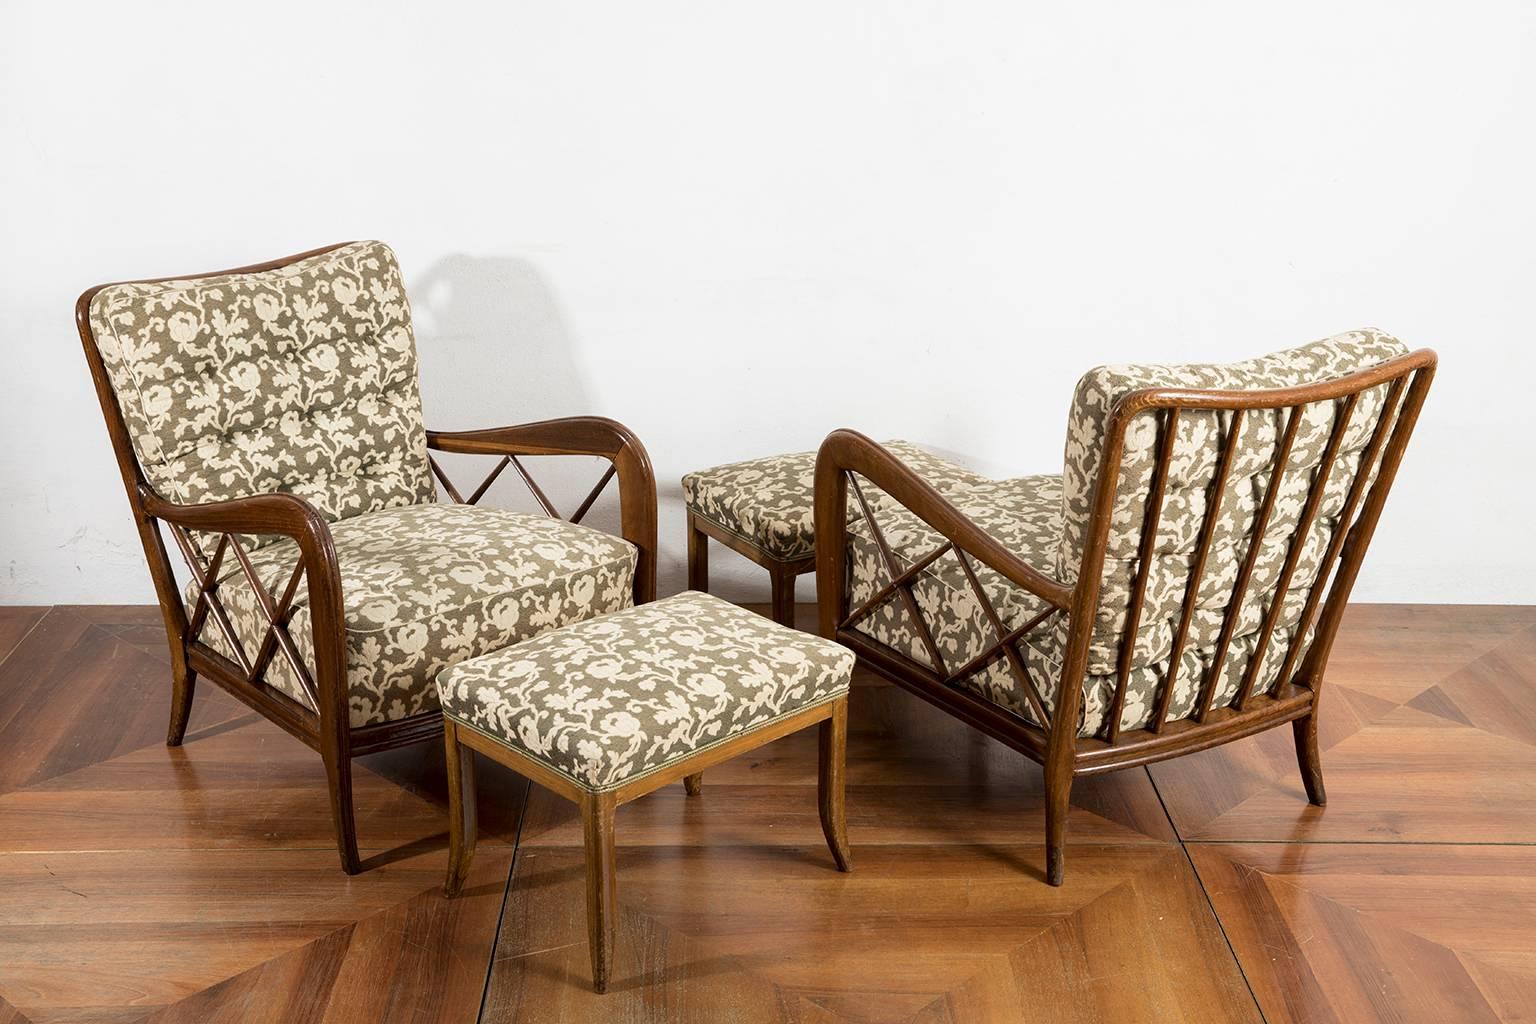 Iconic set of two mahogany solid wood armchairs with footrests designed by Paolo Buffa in the 1940s with their original fabric.